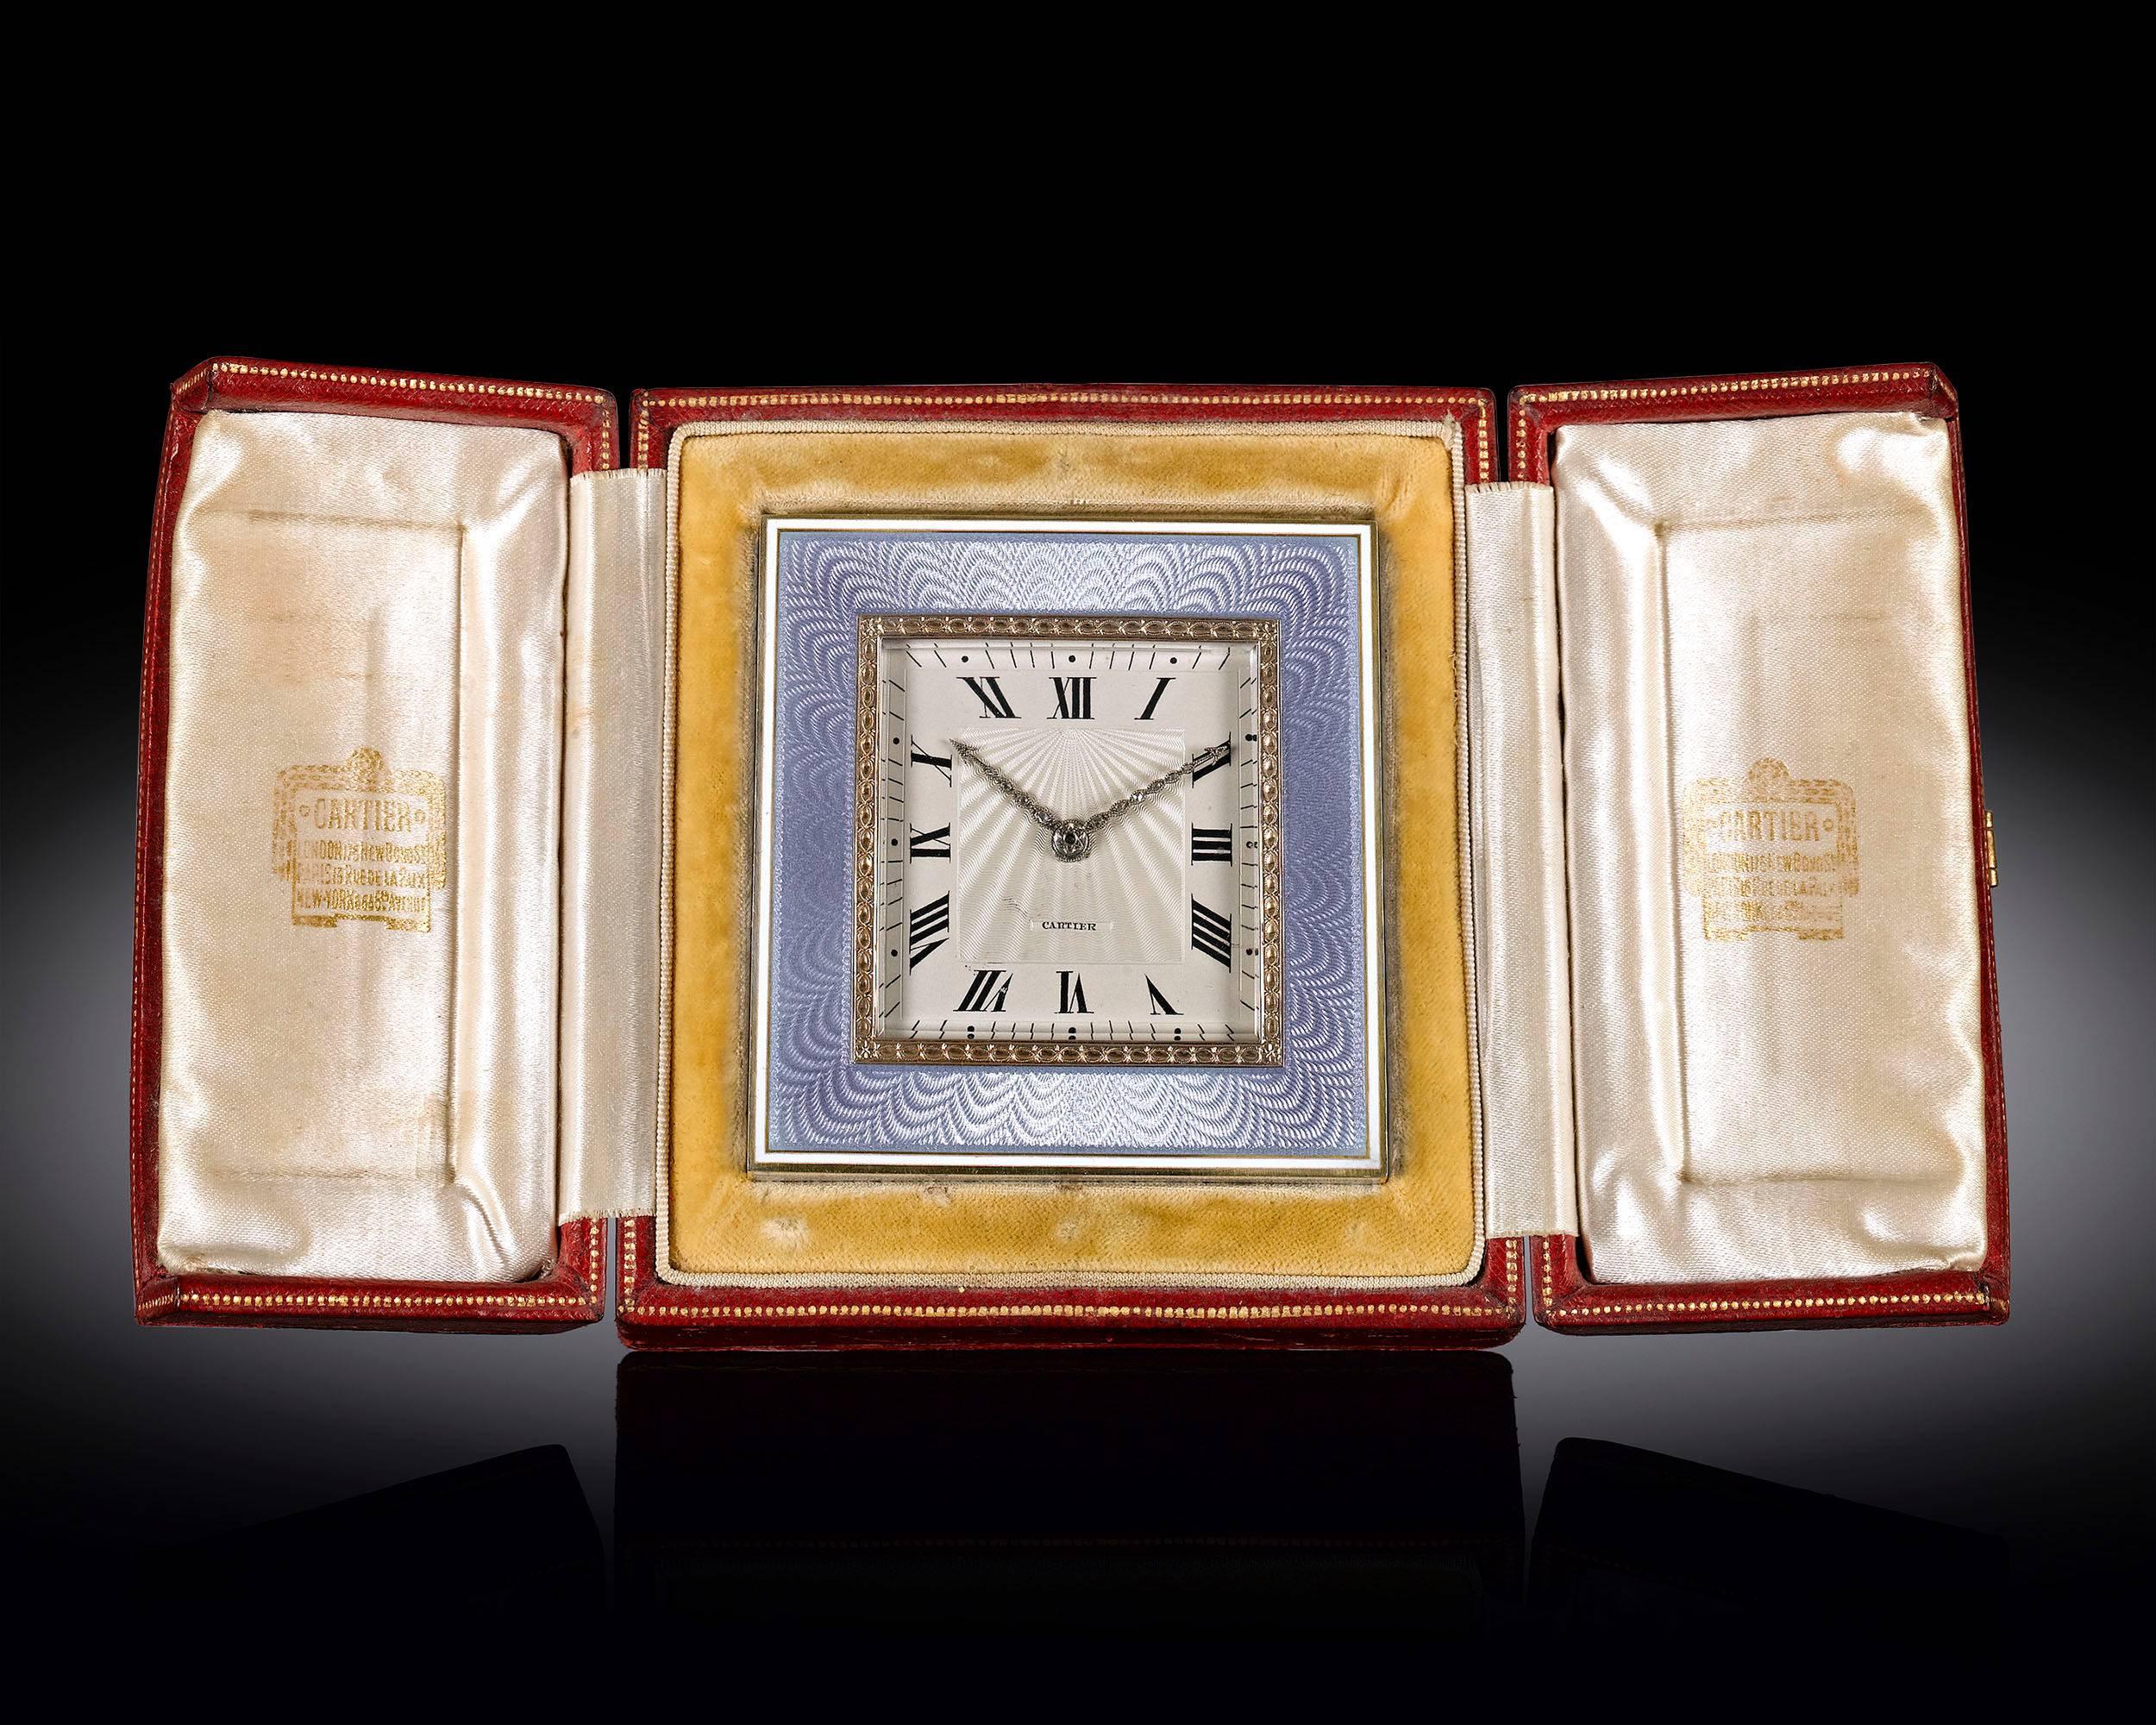 This elegant desk clock by Cartier features a soft blue guilloché enamel and gold frame. With Roman numerals marking the hours, the dial's radiant guilloché pattern is well-complemented by hands studded with fine white diamonds. An outstanding